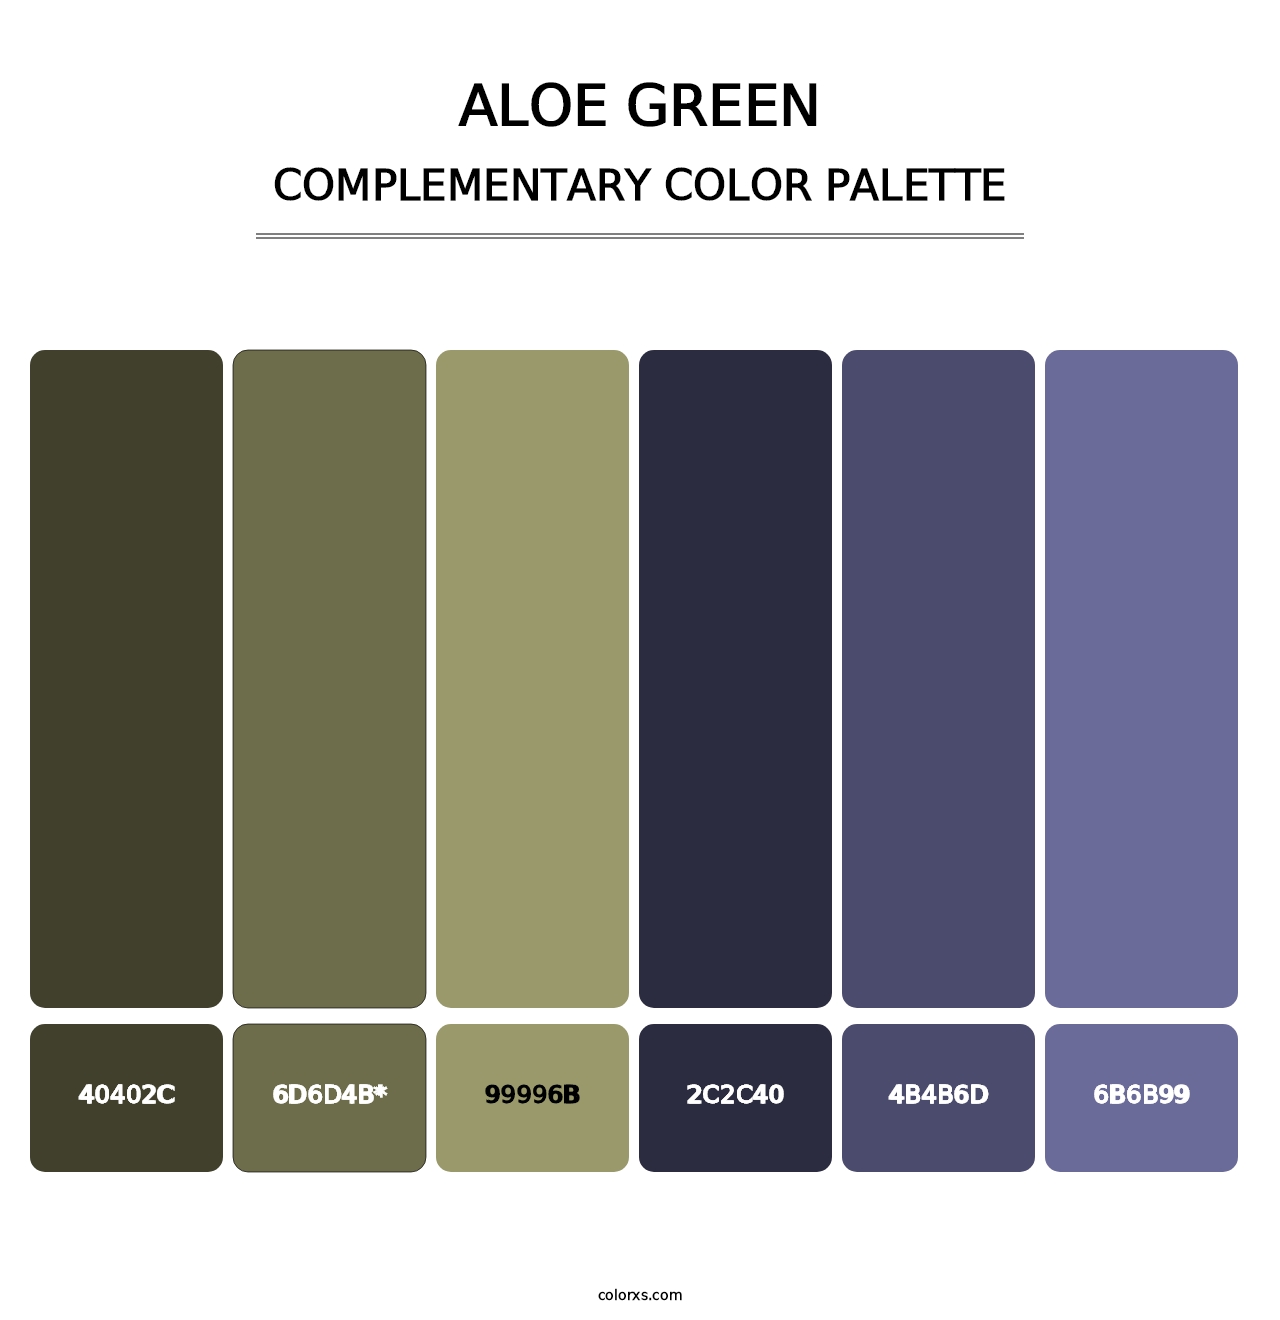 Aloe Green - Complementary Color Palette